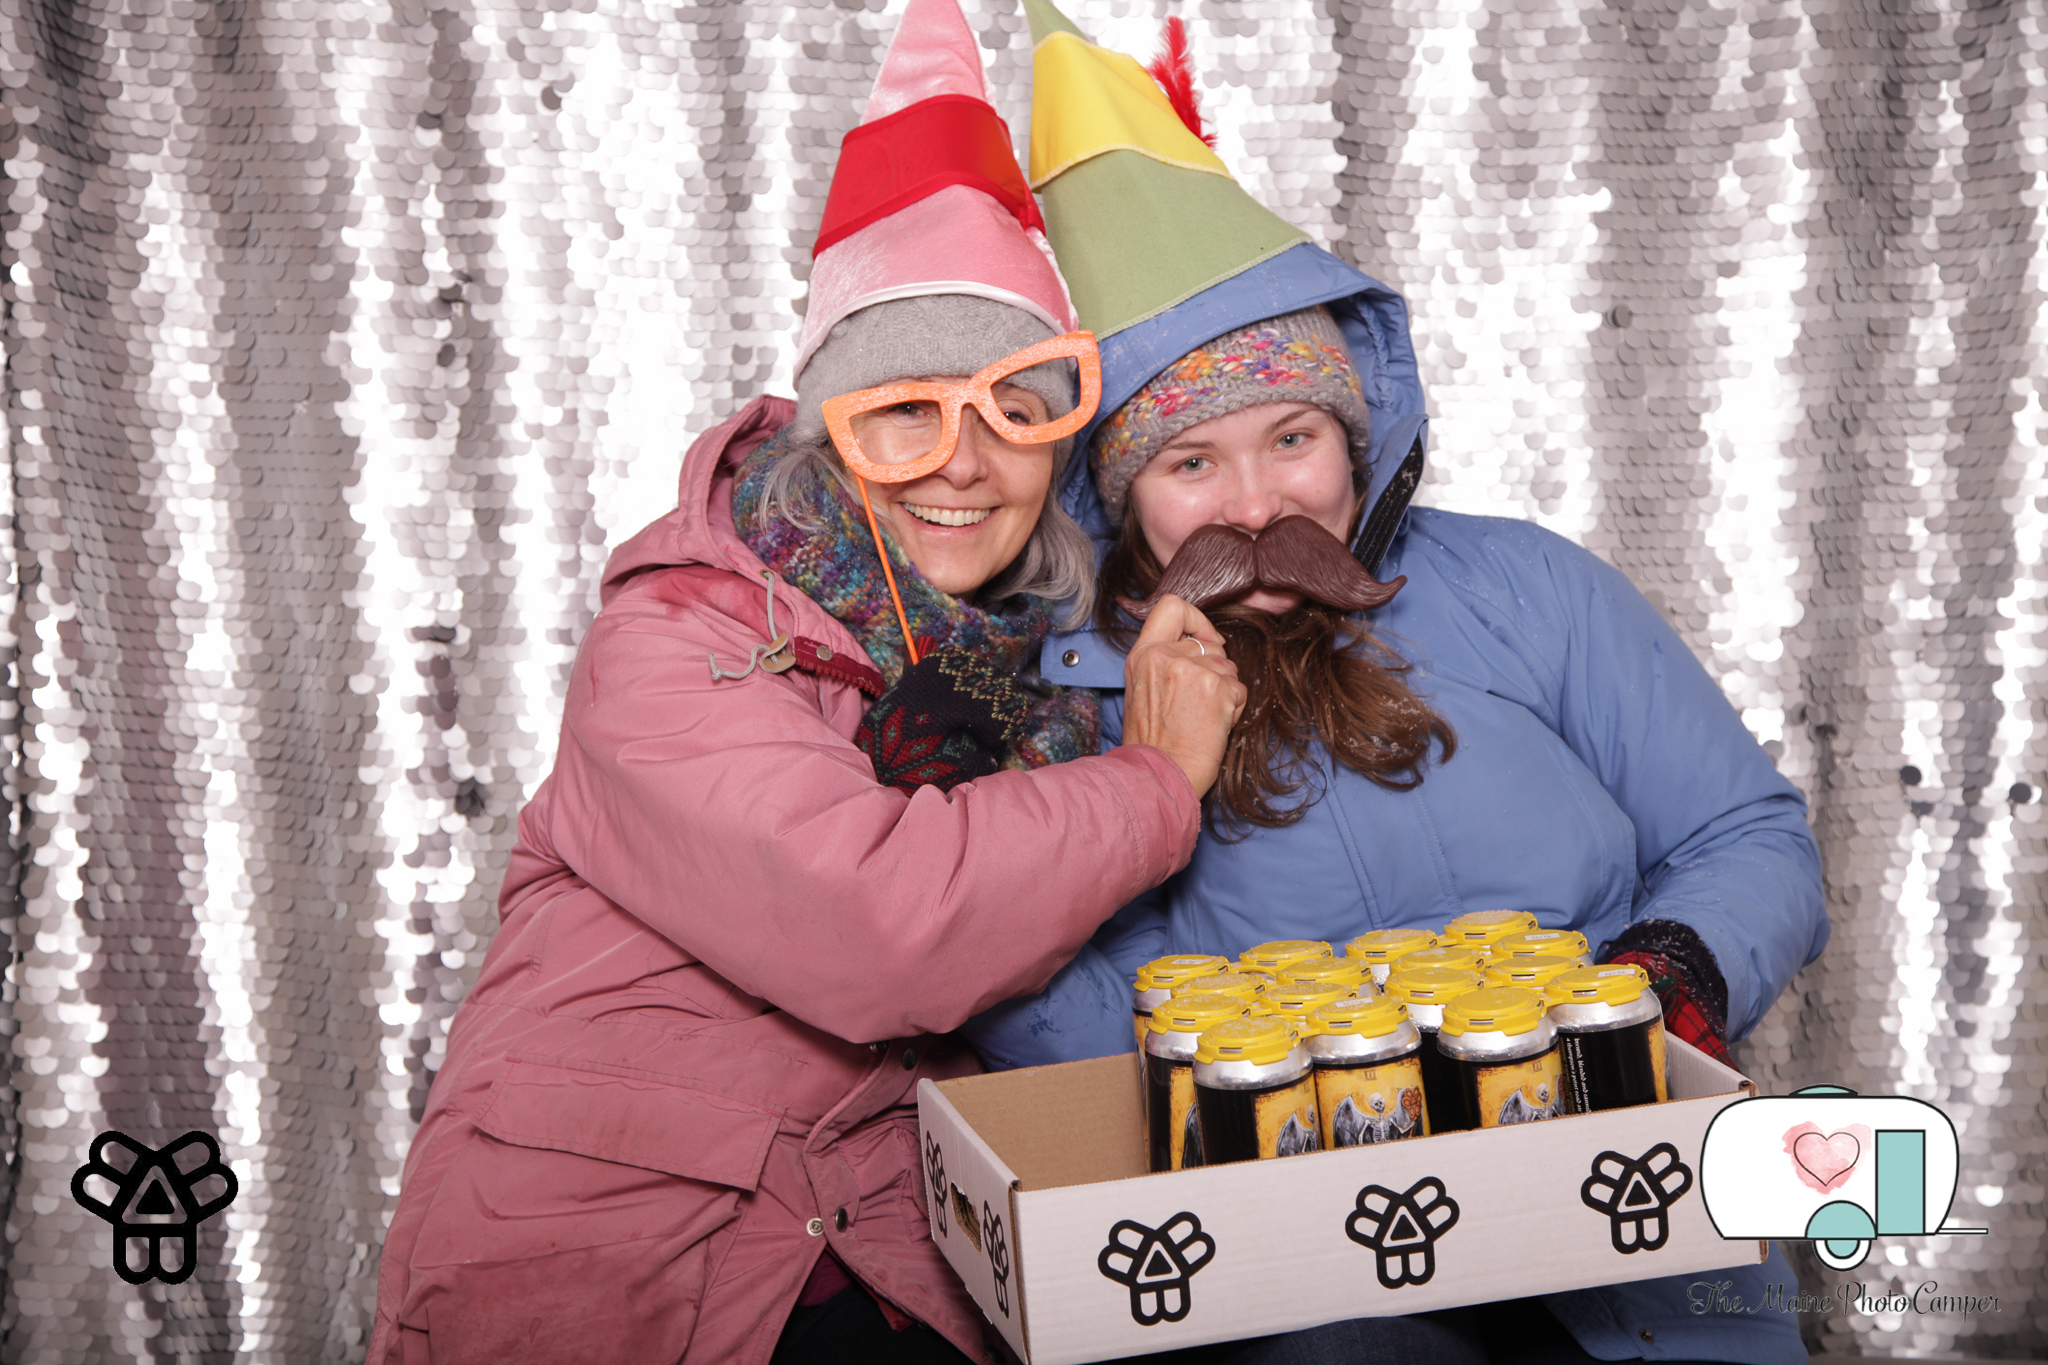 Bissell Brothers Holiday Party 2016, The Maine Photo Camper, Maine Tinker Photography -32.jpg